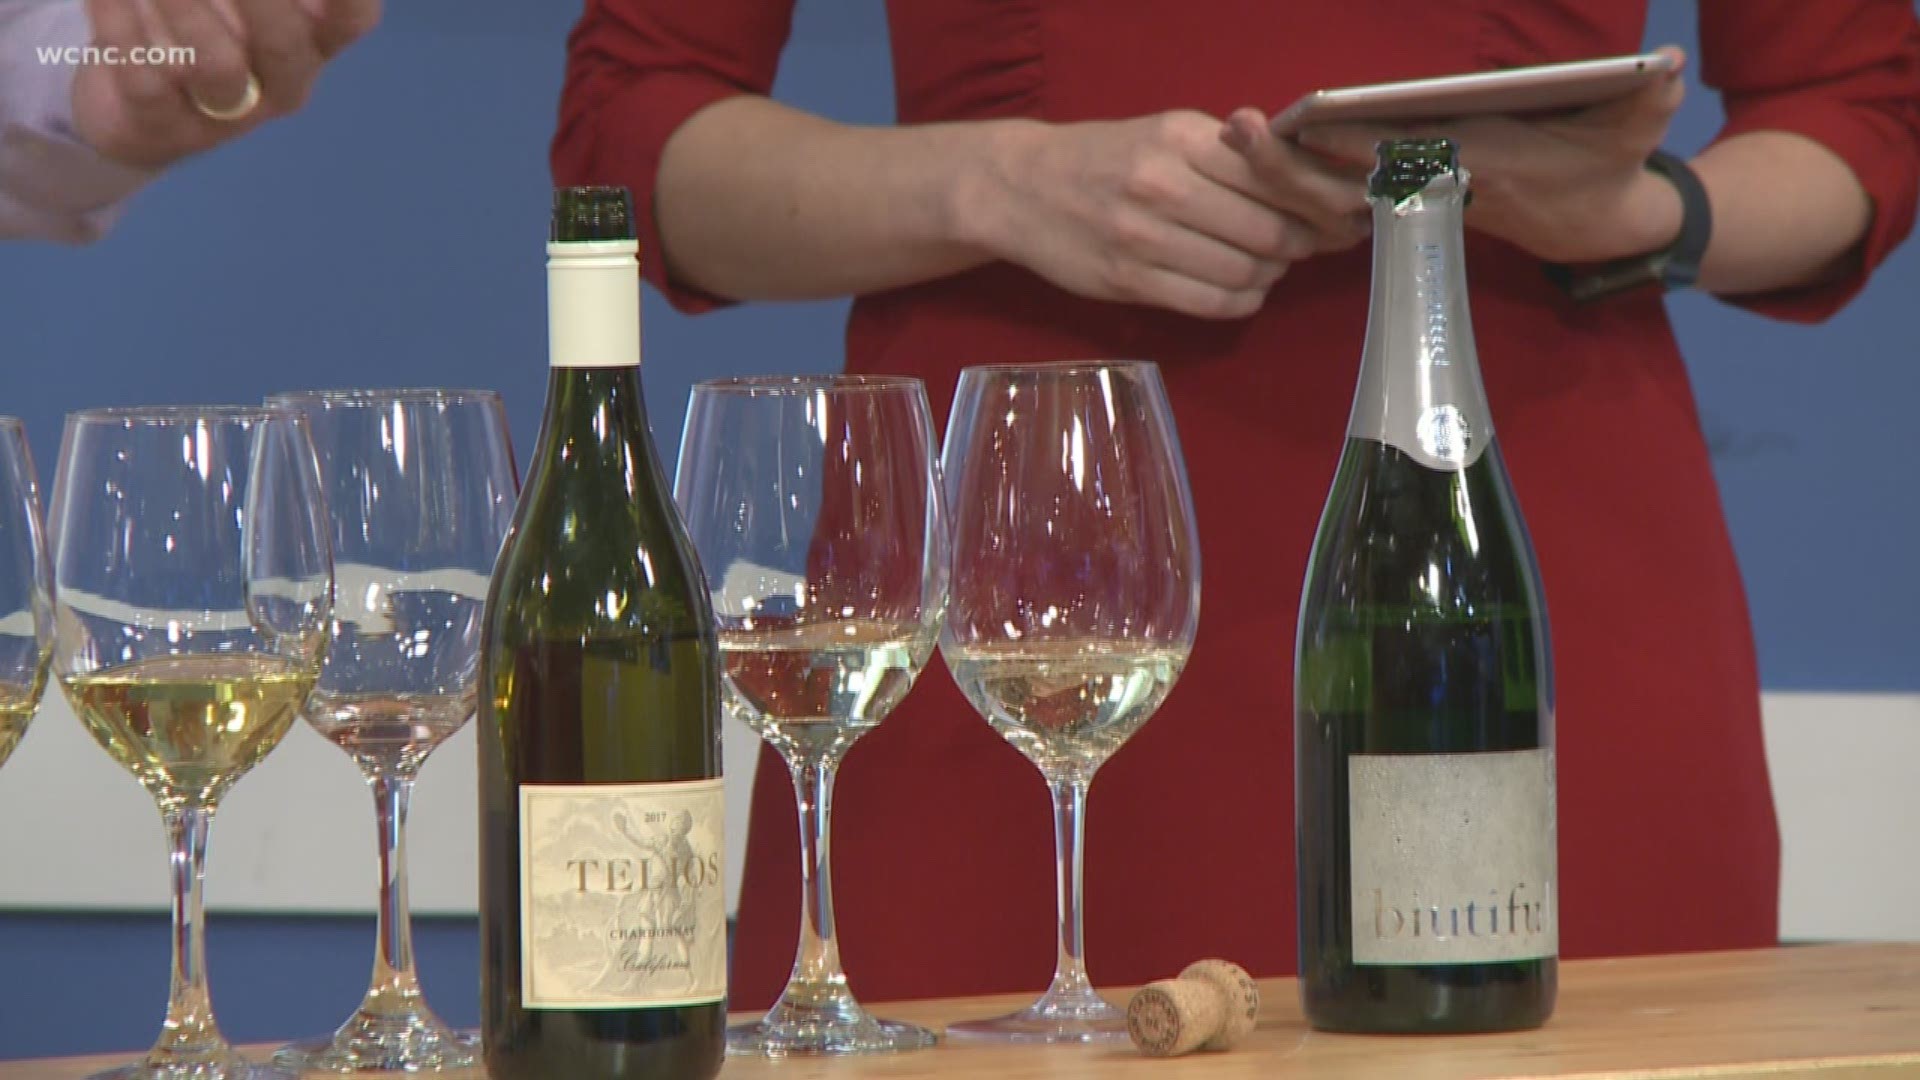 Wines featured on the show: Cava Sparkling White from Spain, Chardonnay from California, Pinot Noir from California, Sparkling Rose (great to serve with dessert)